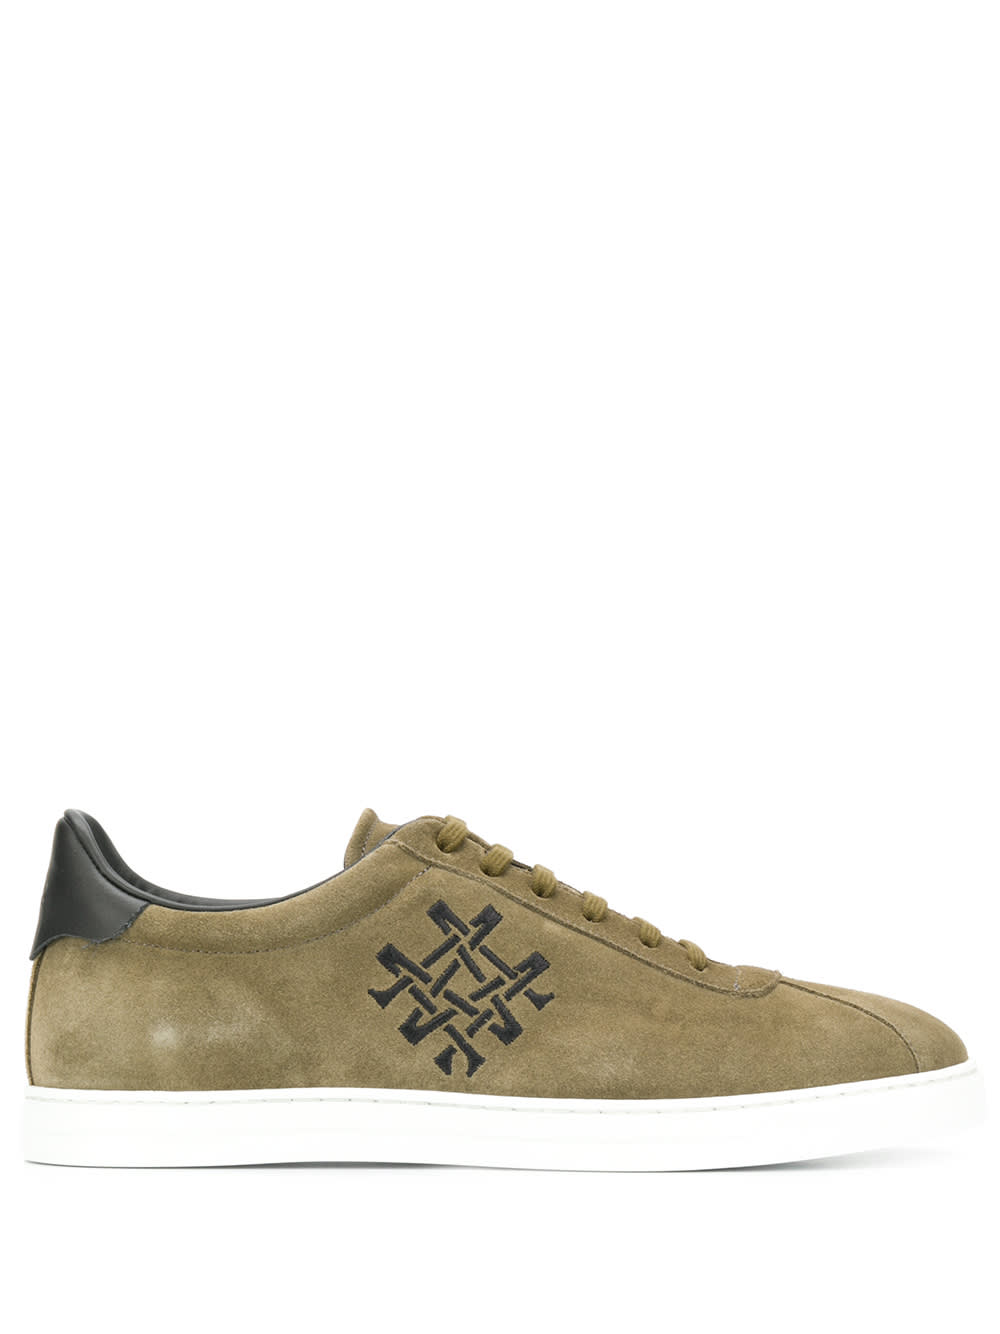 Mr & Mrs Italy Unisex Suede Sneakers